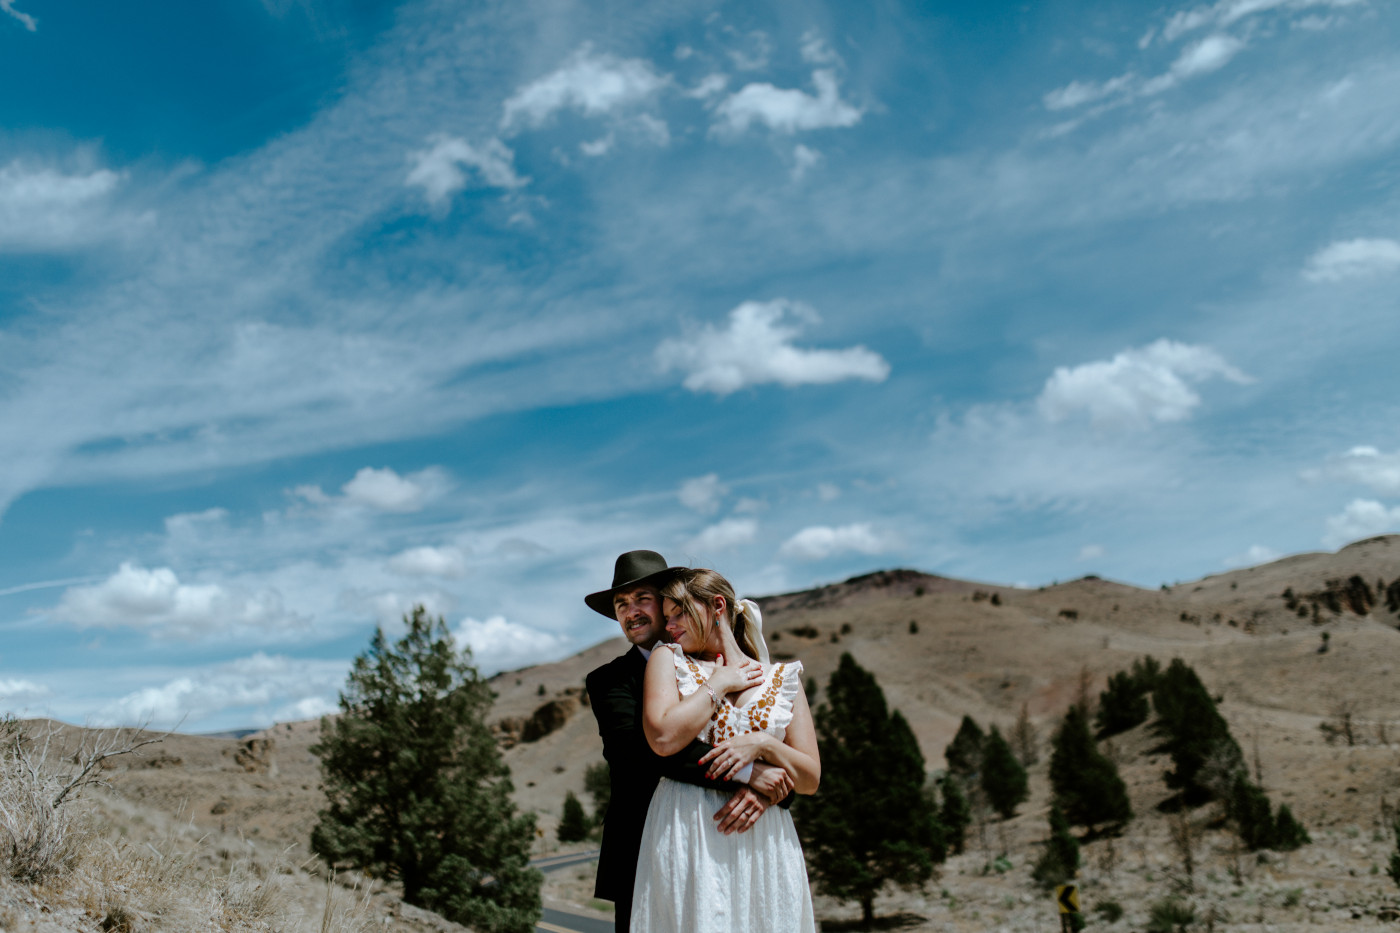 Greyson and Emily hugging. Elopement photography in the Central Oregon desert by Sienna Plus Josh.